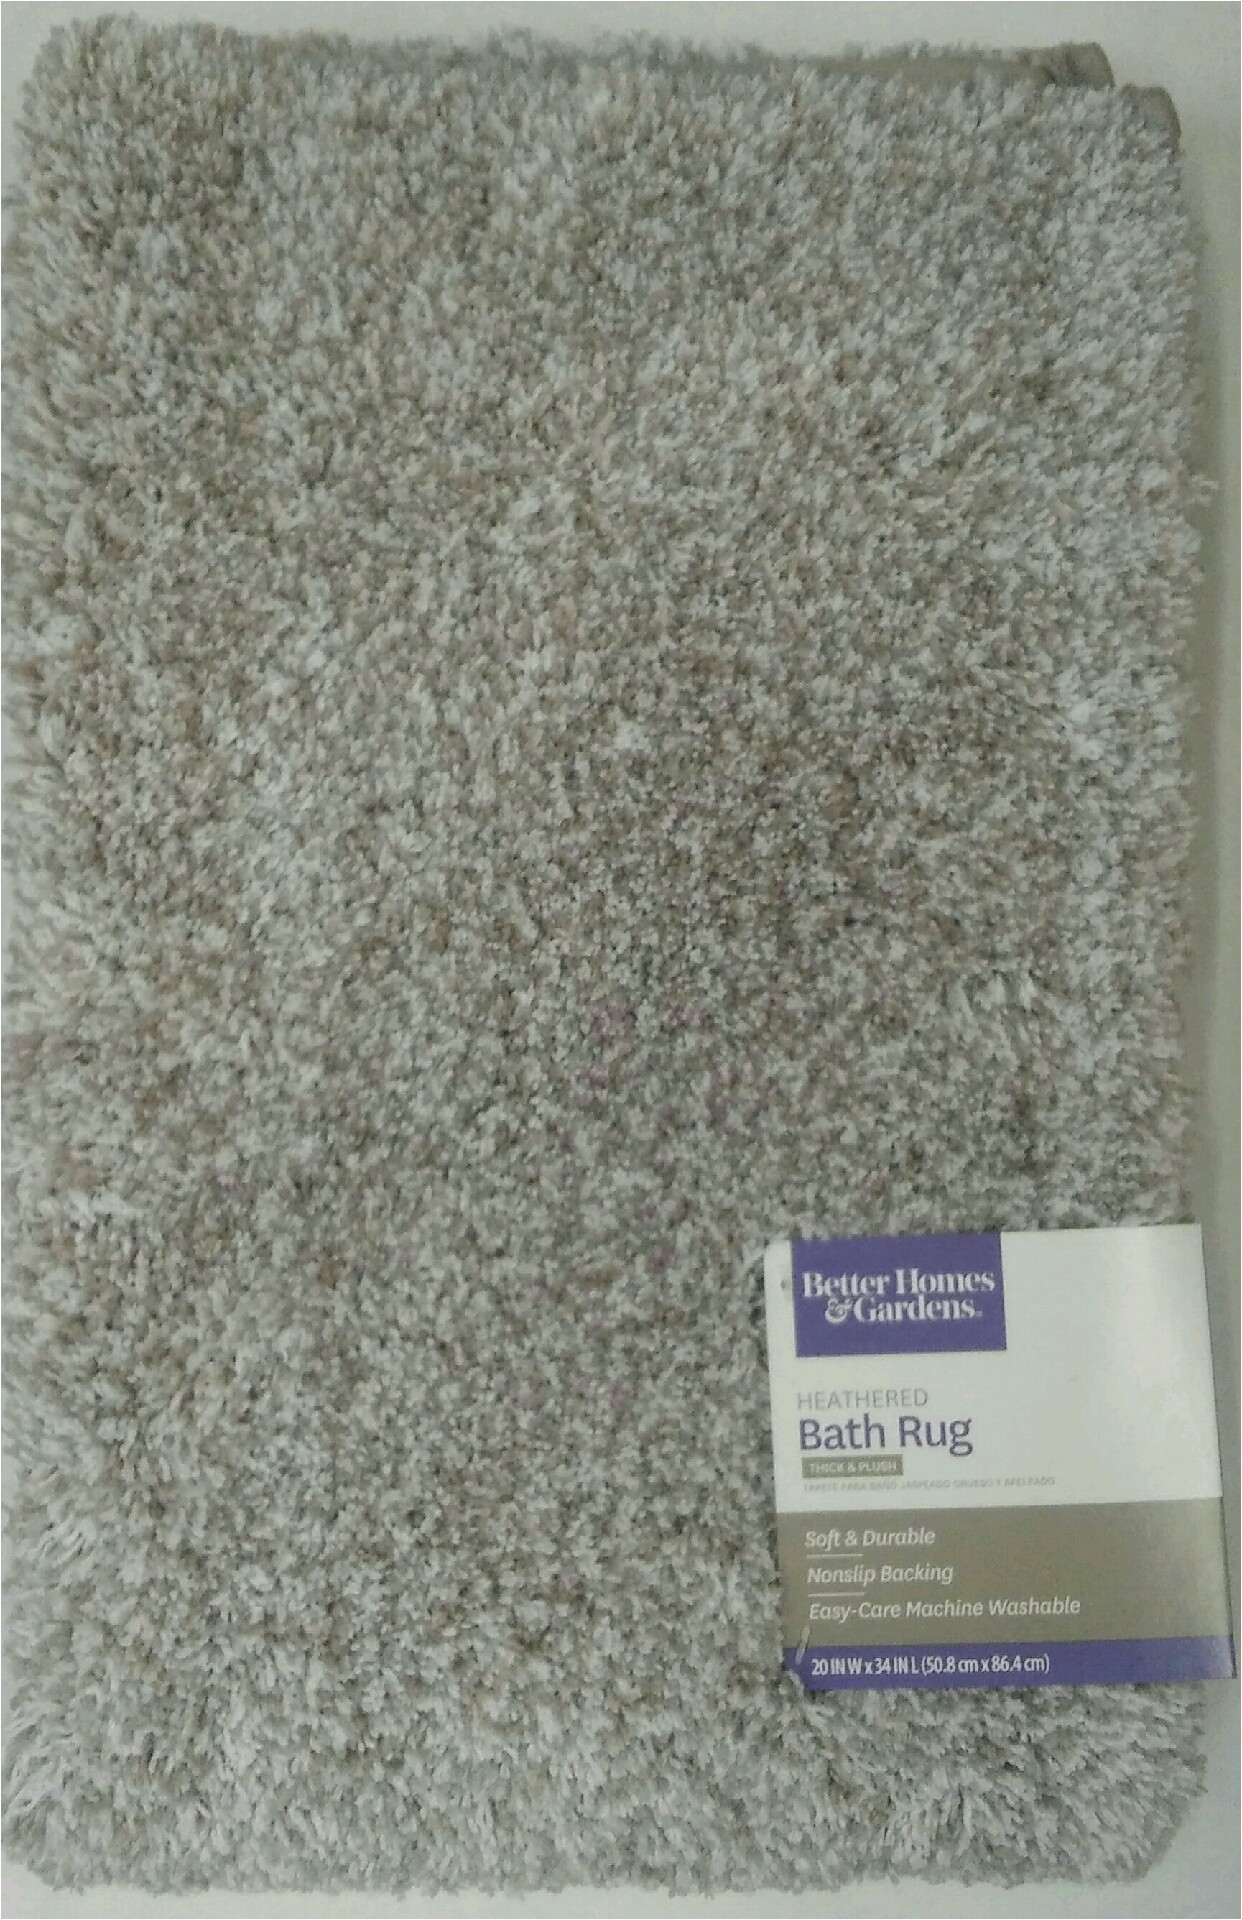 Taupe Colored Bath Rugs Better Homes and Gardens Thick and Plush Bath Rug 20 X 34 Taupe Splash Heather